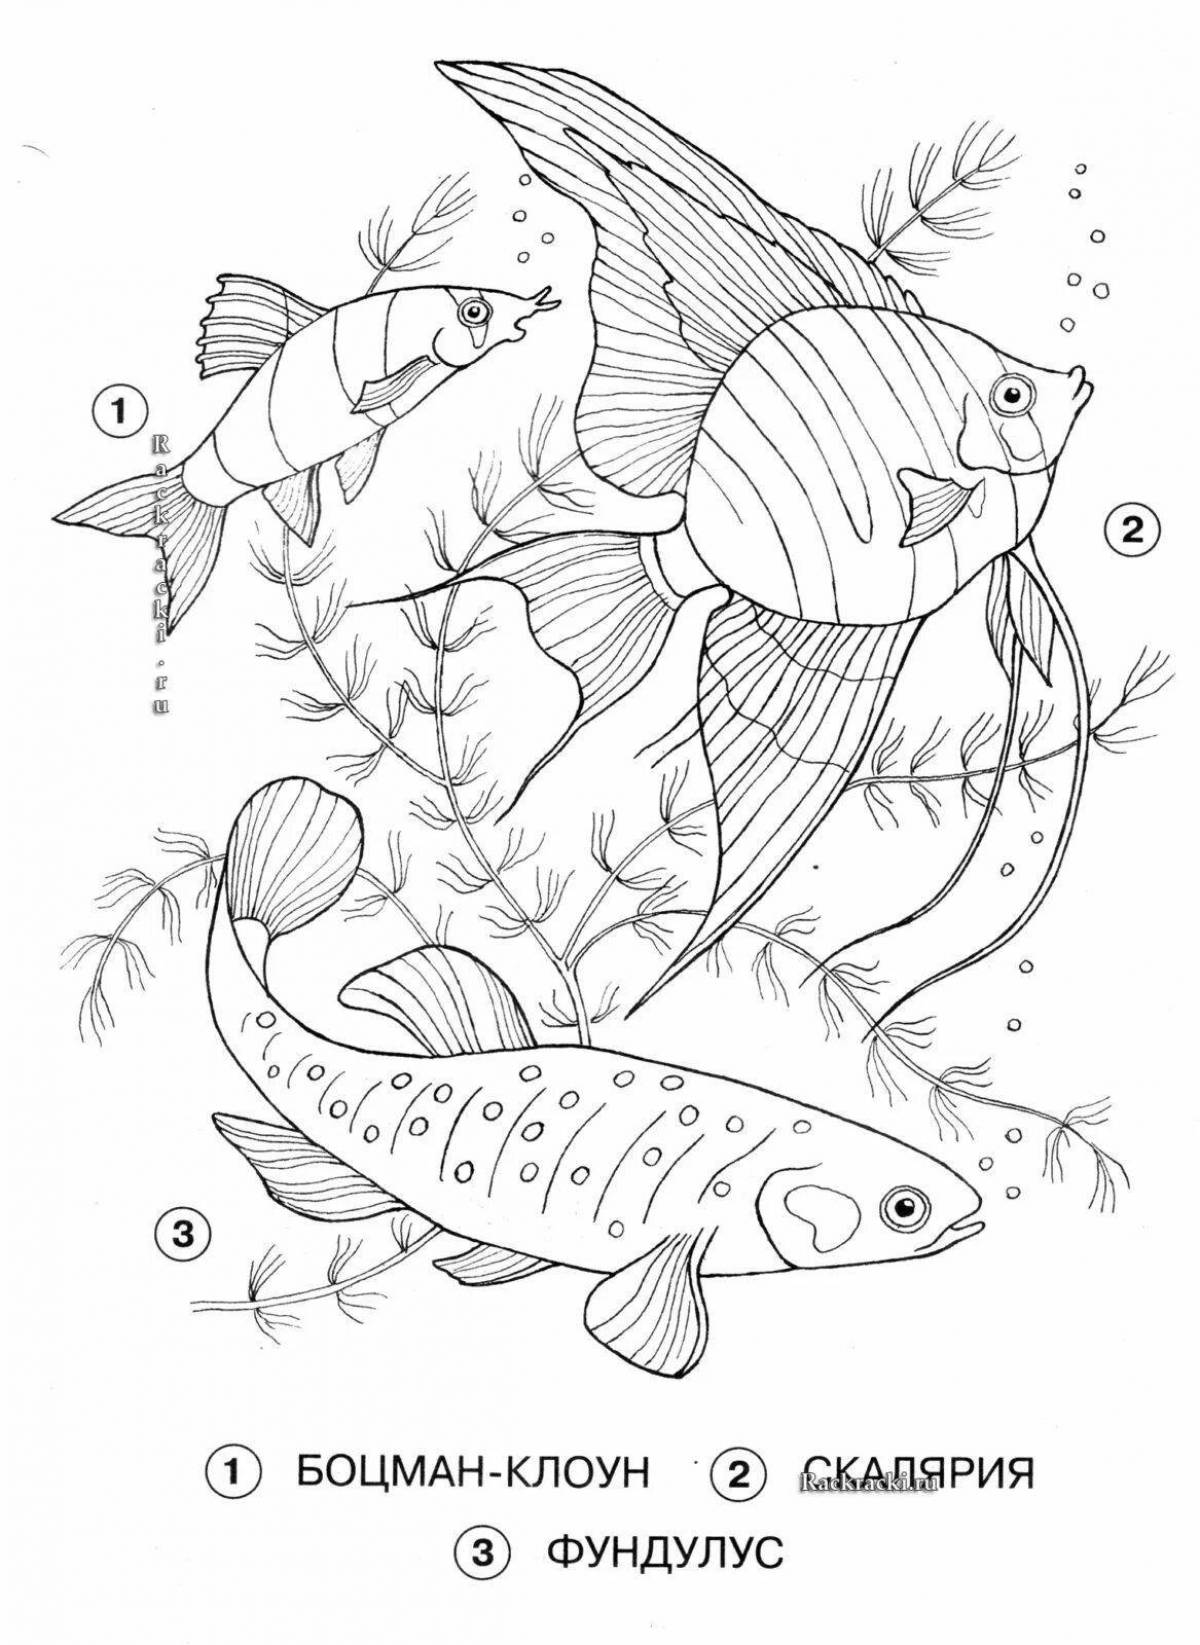 Sweet river fish coloring page